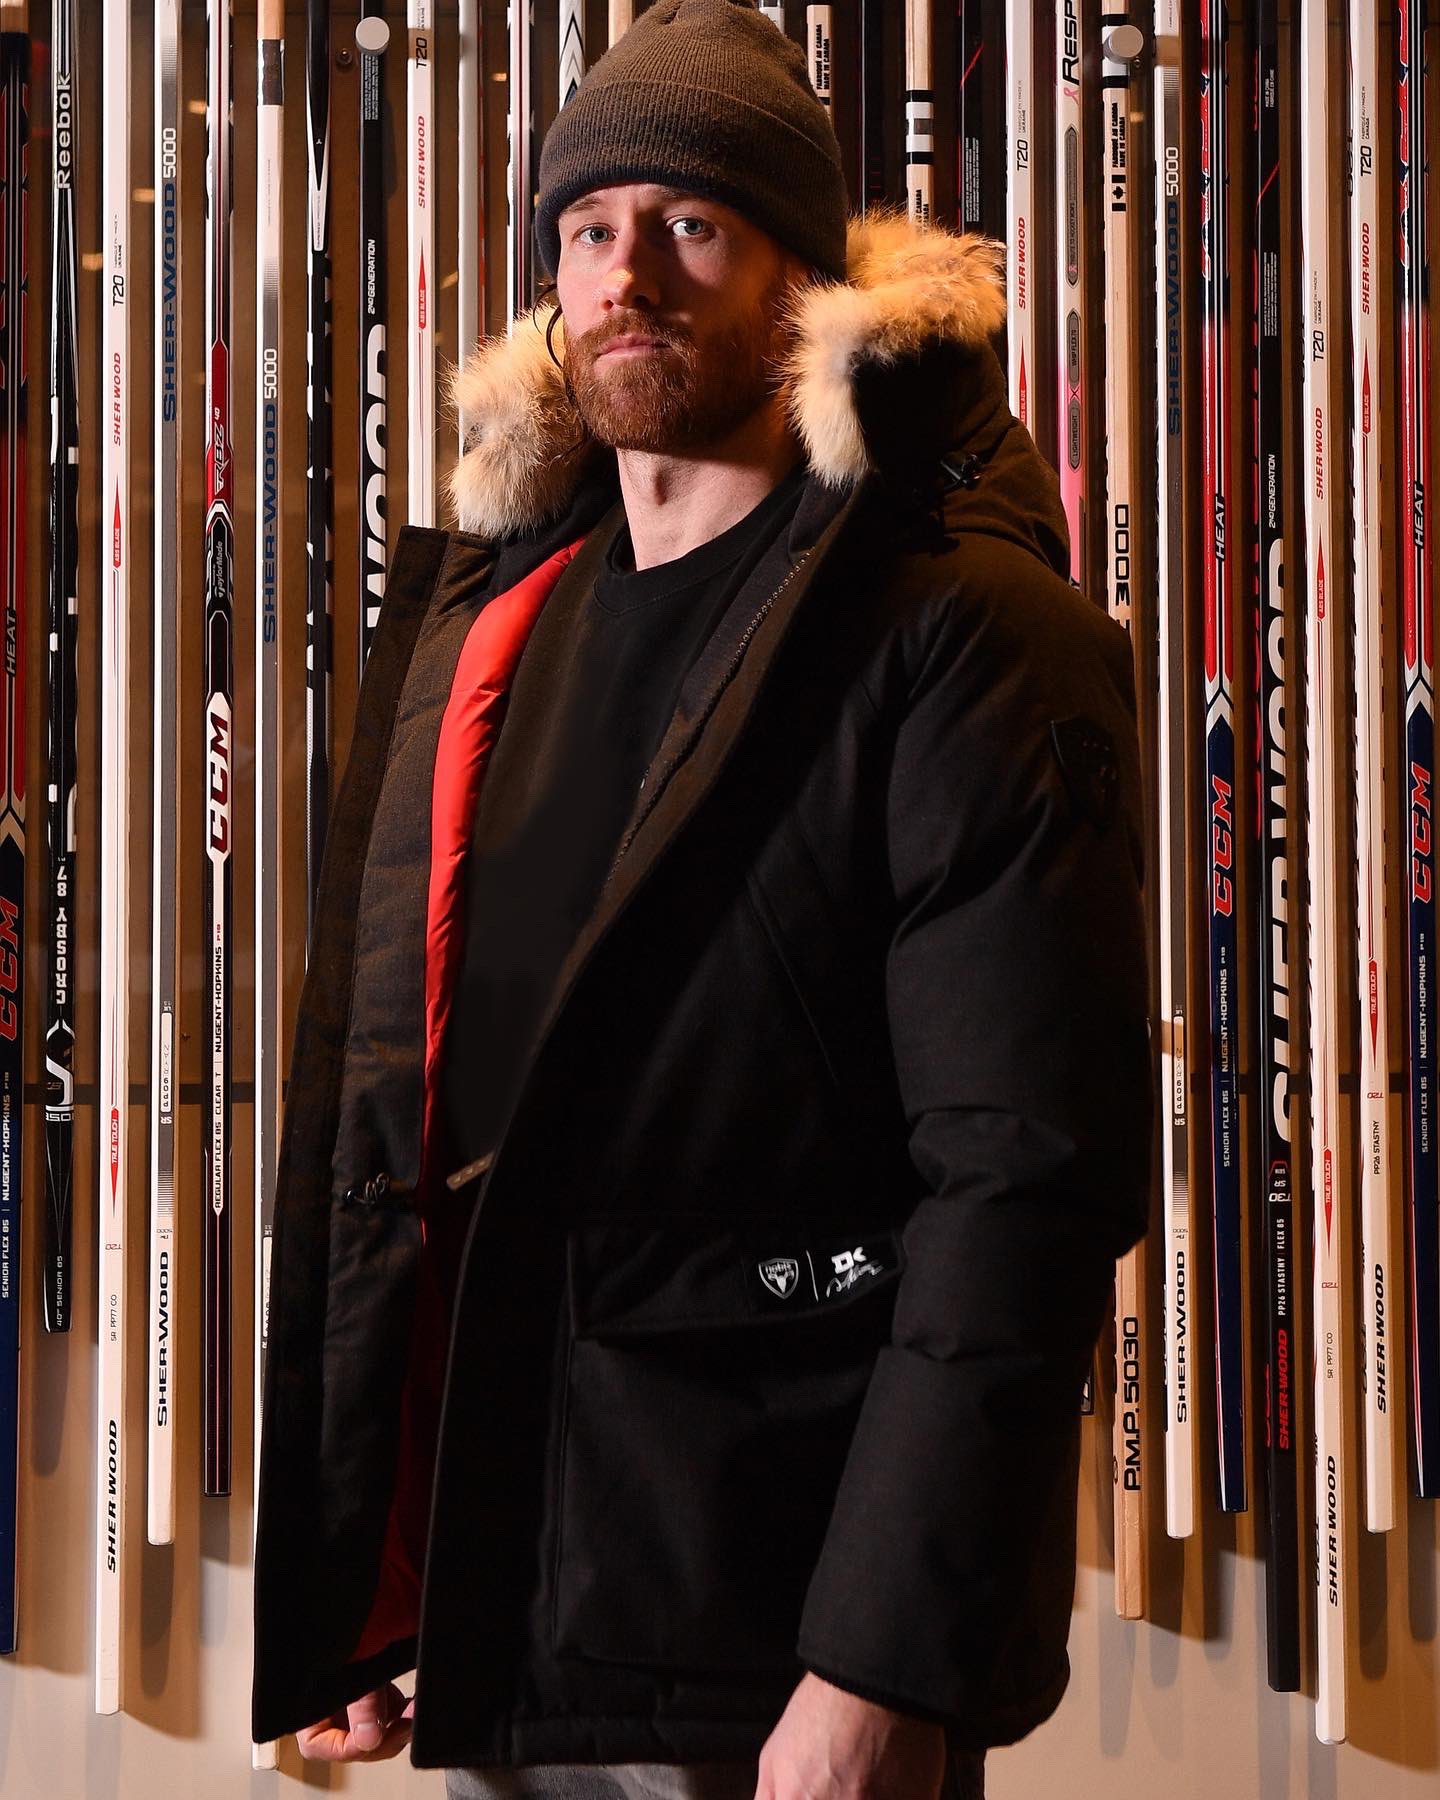 Meet Duncan Keith — Official Website of Duncan Keith